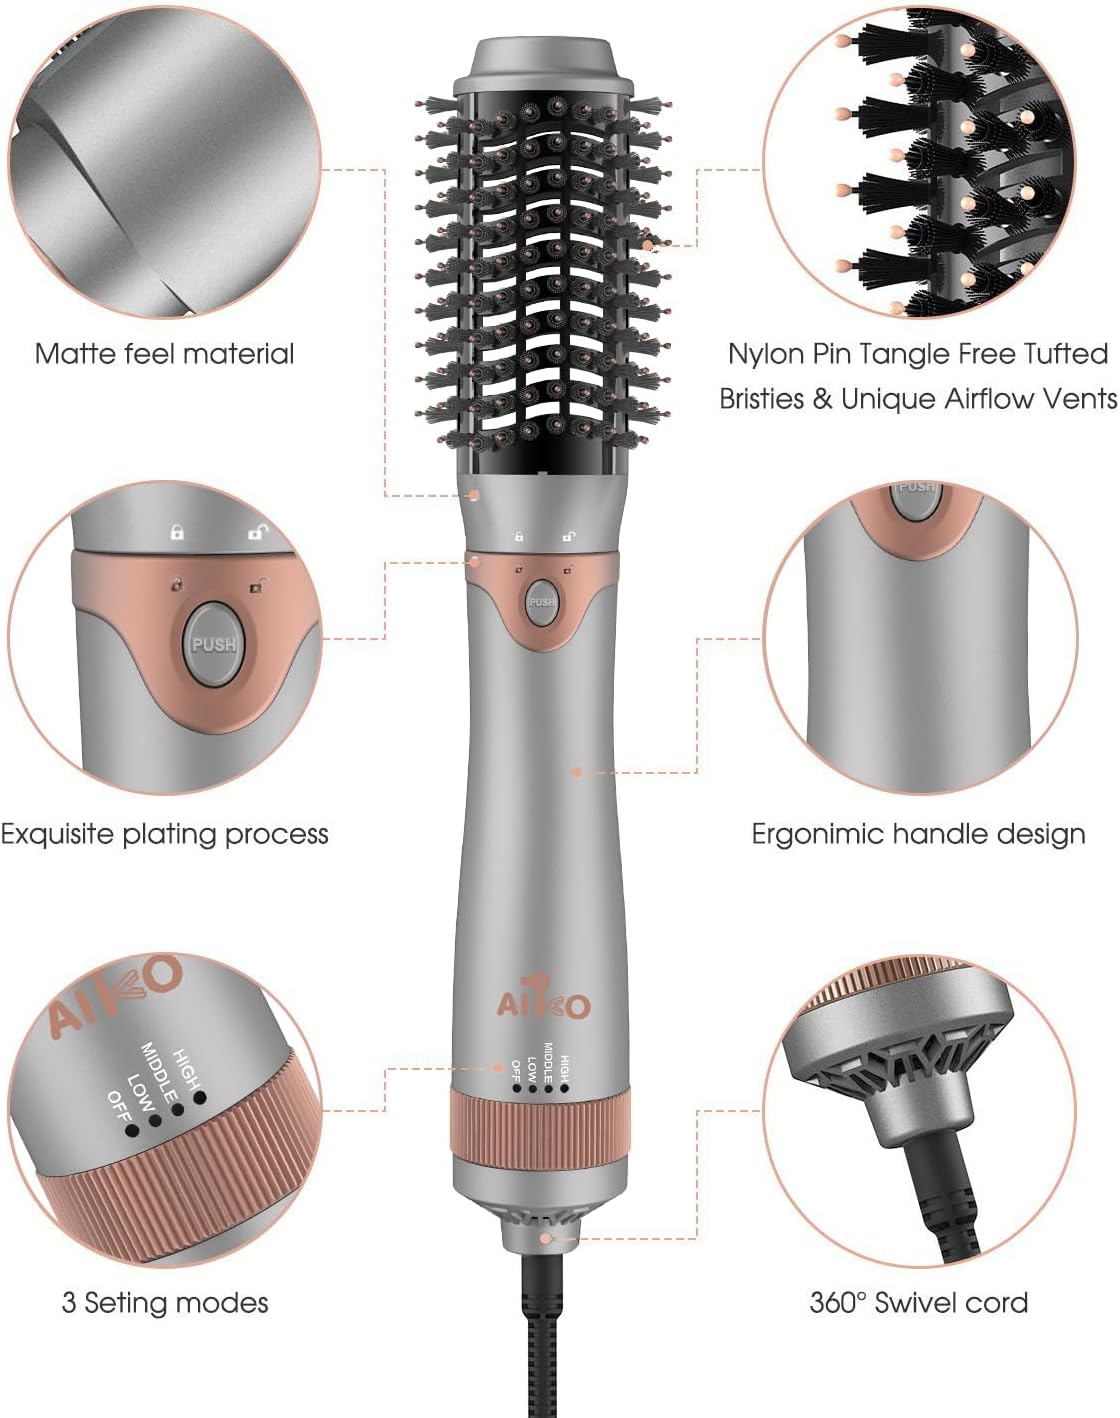 AIKO PRO 4-in-1 Hair Dryer Brush, Negative Ion Detachable Hair Dryer Styler Hot Air Hair Dryer for Straightening Curling Drying Multifunctional Styling, 1000W, Gray, Rose Gold